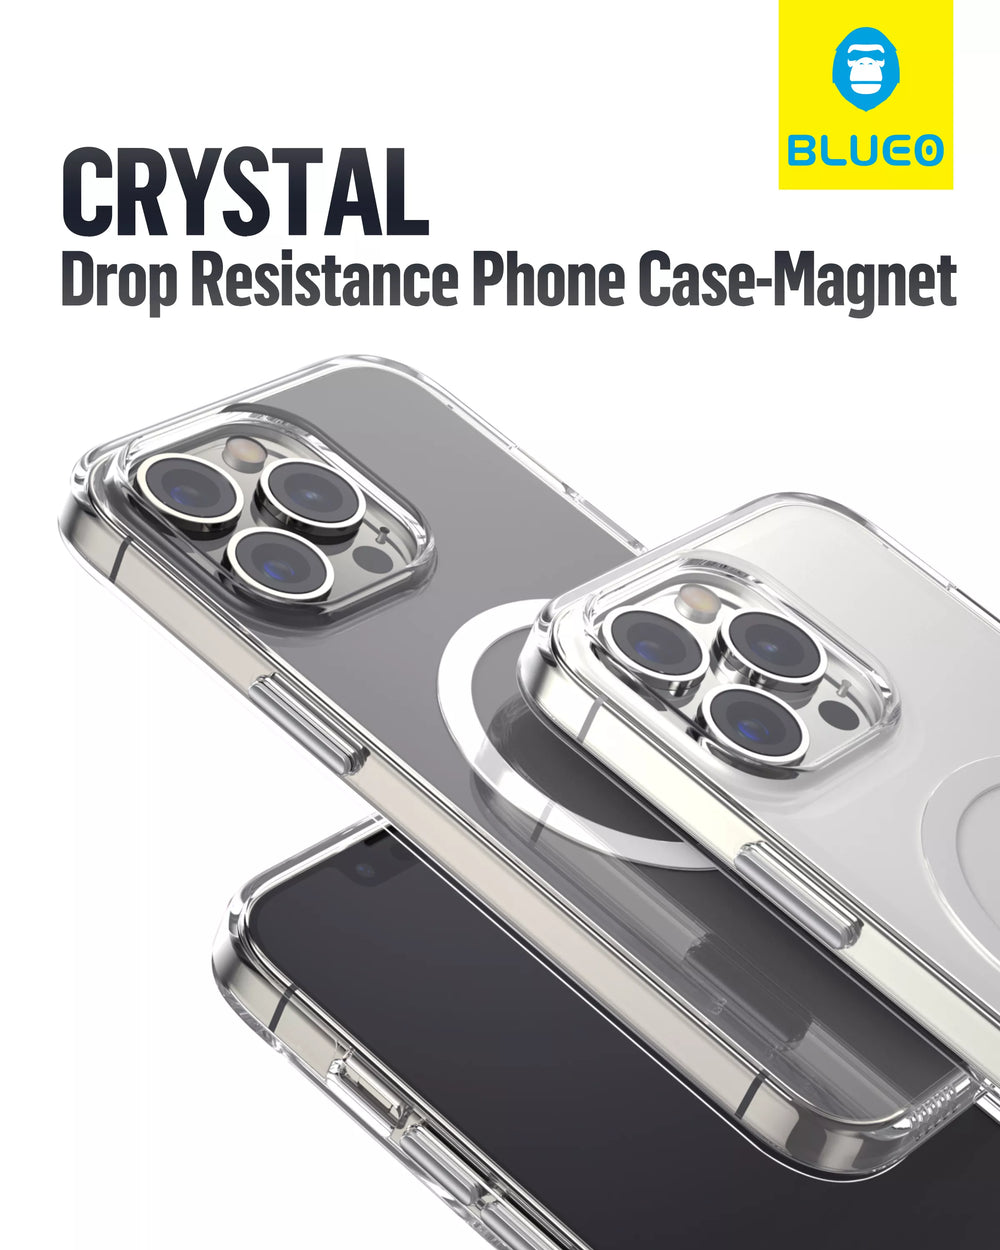 Blueo Crystal Pro Drop Resistance Phone Case-Magnet for iPhone 14 Pro Max Purple